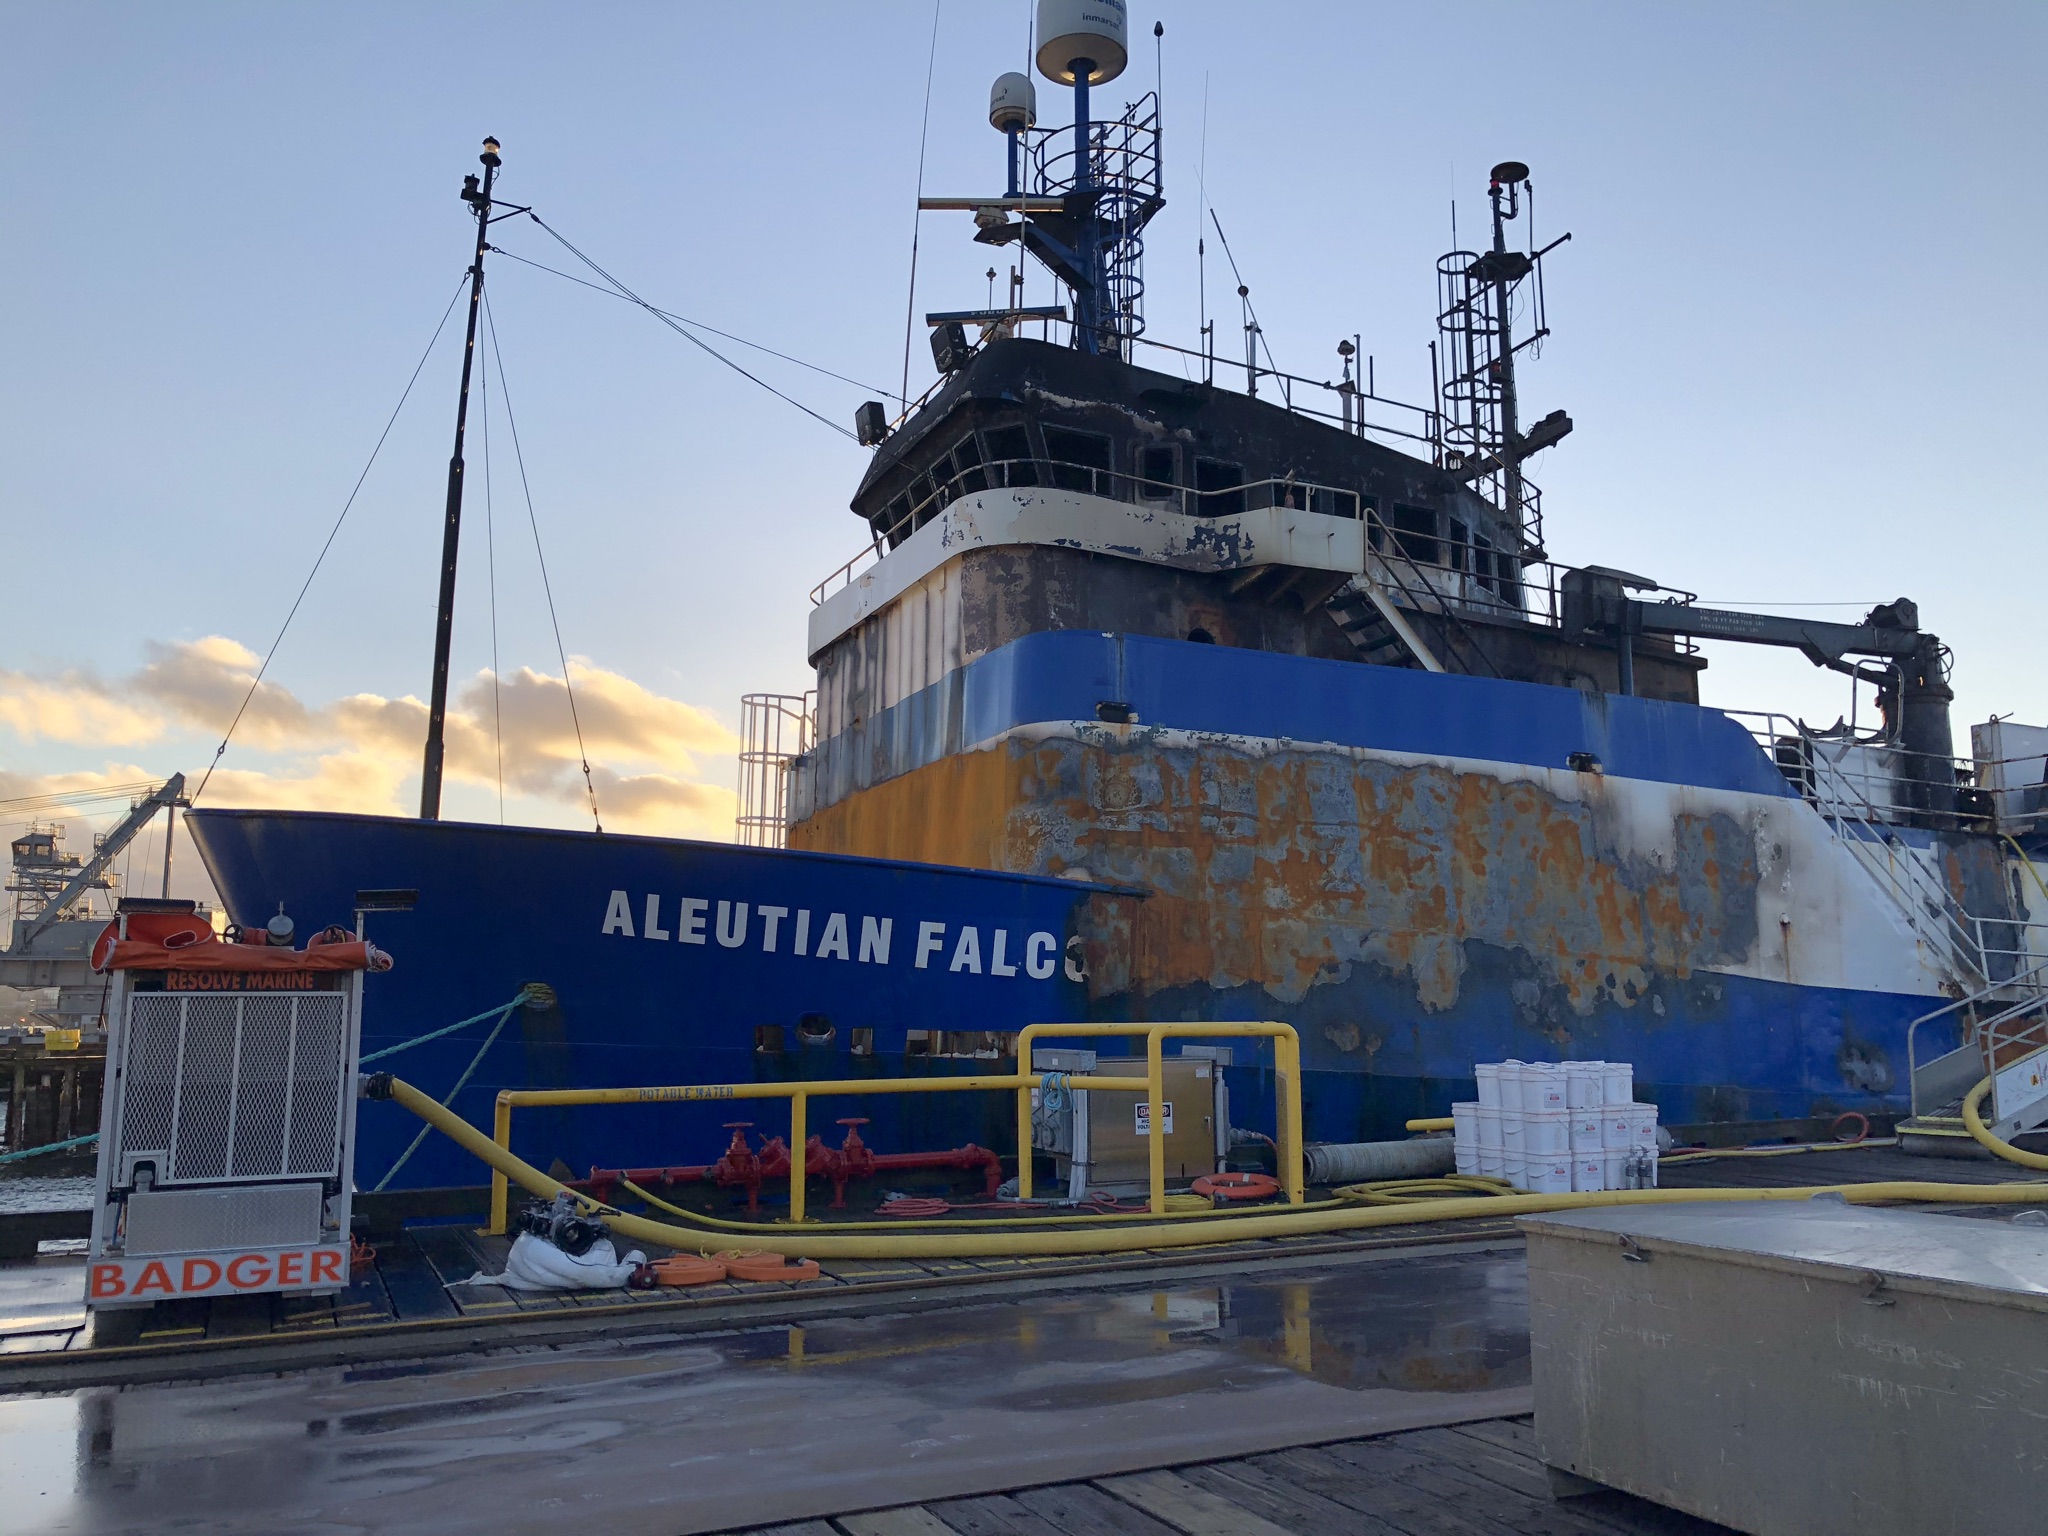 Image of FV Aleutian Falcon after the fire was extinguished.